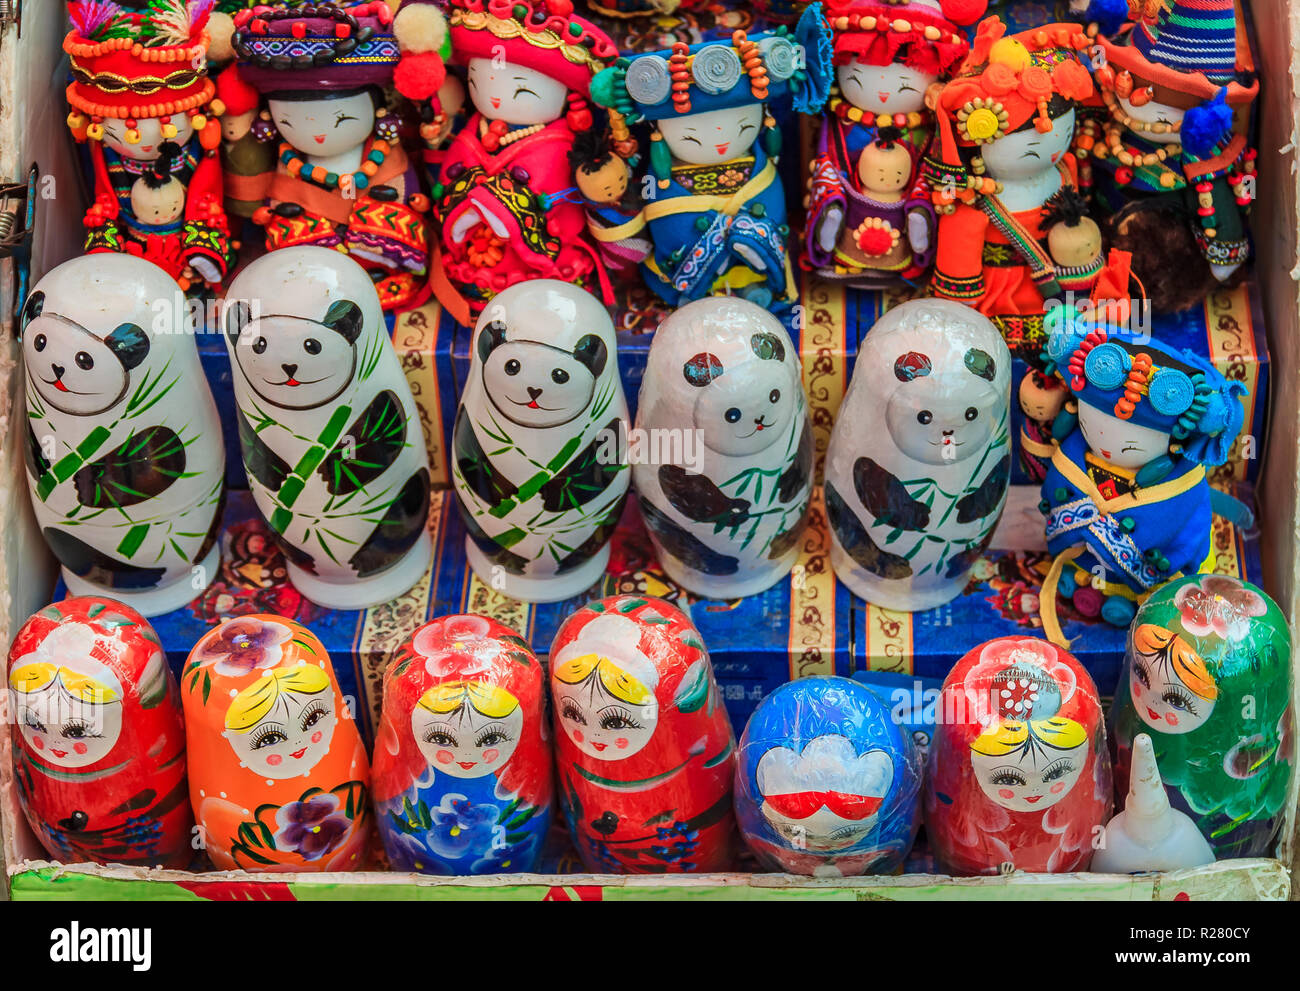 Traditional Chinese dolls and Russian matryoshka along with stylized panda bear nesting toys on display at a souvenir shop by the Great Wall of China  Stock Photo